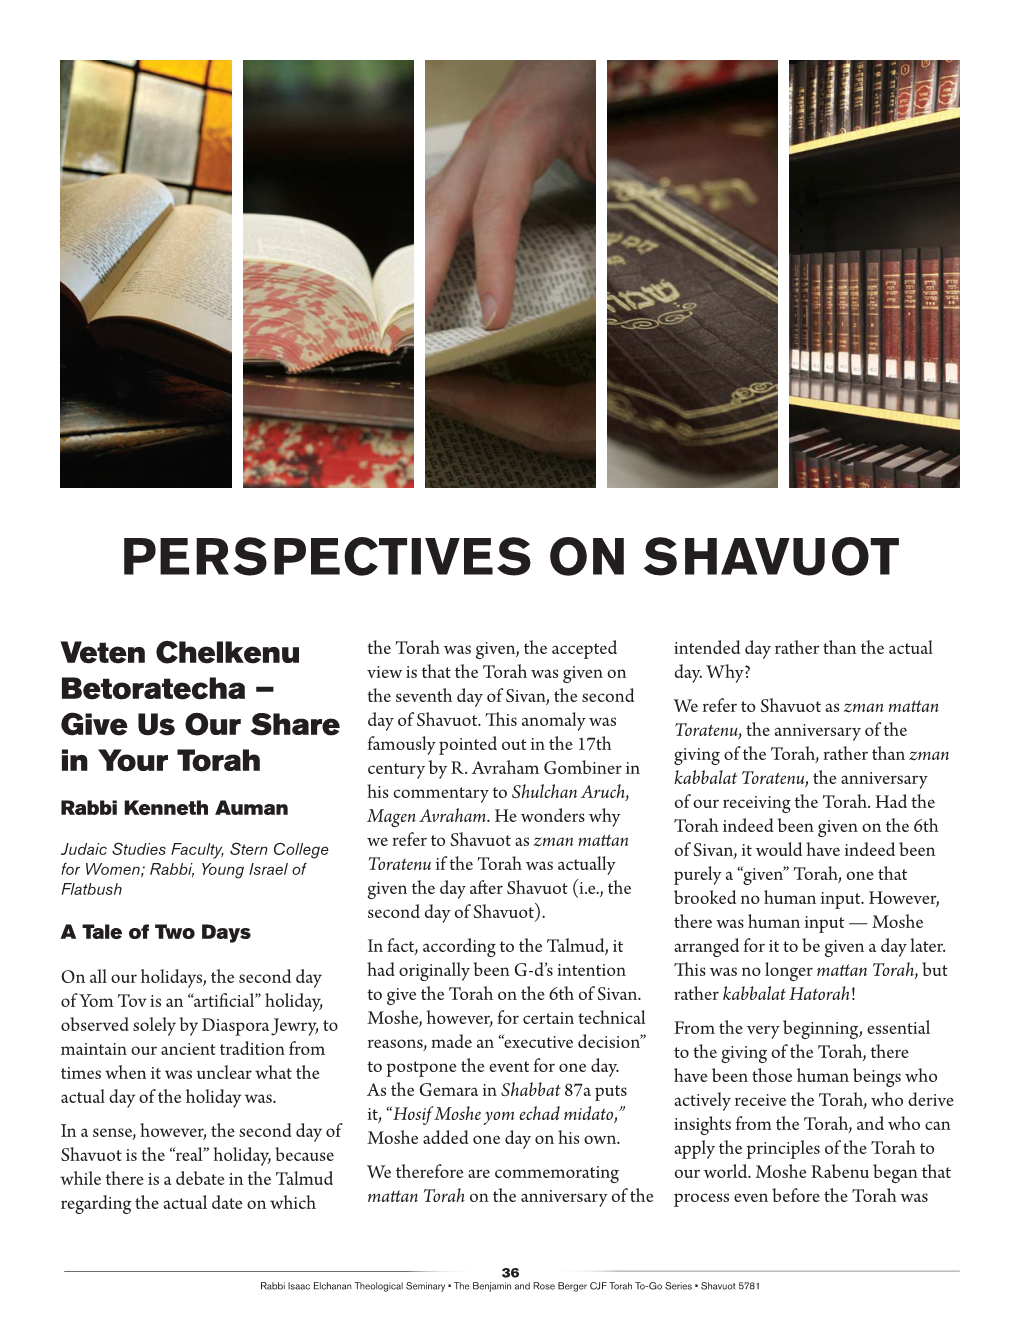 Perspectives on Shavuot